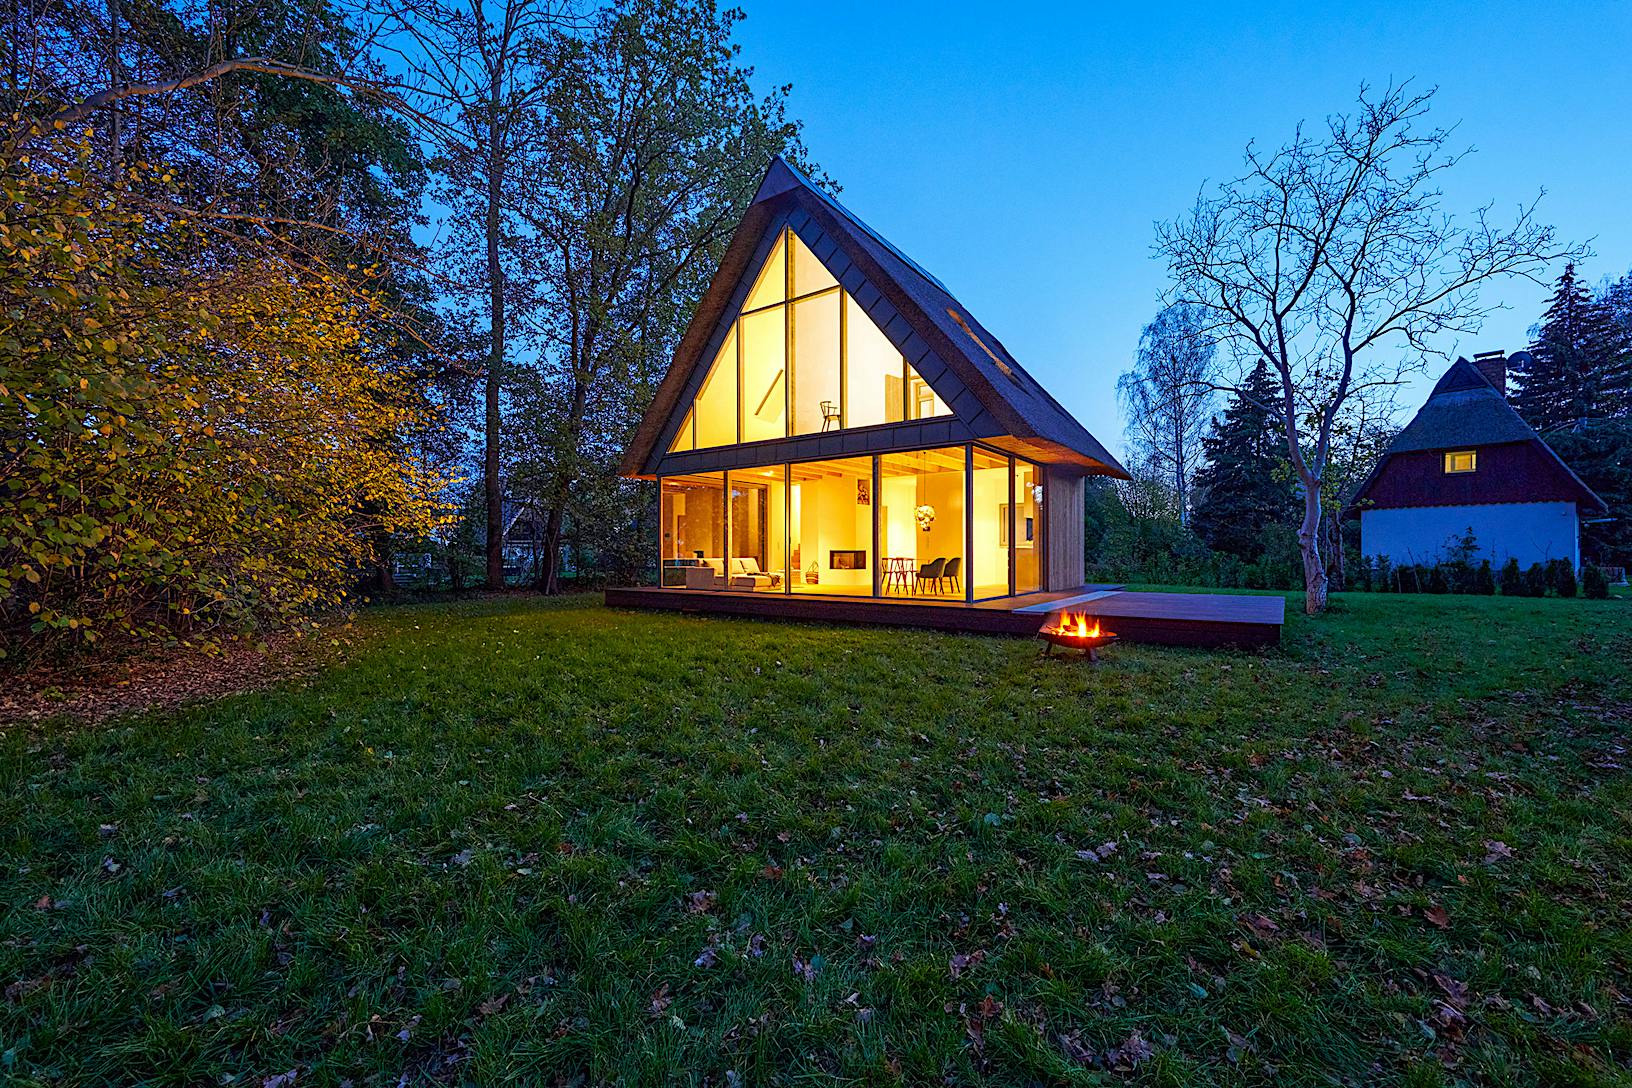 A modern cabin with minimal sliding glass walls in the woods at dusk